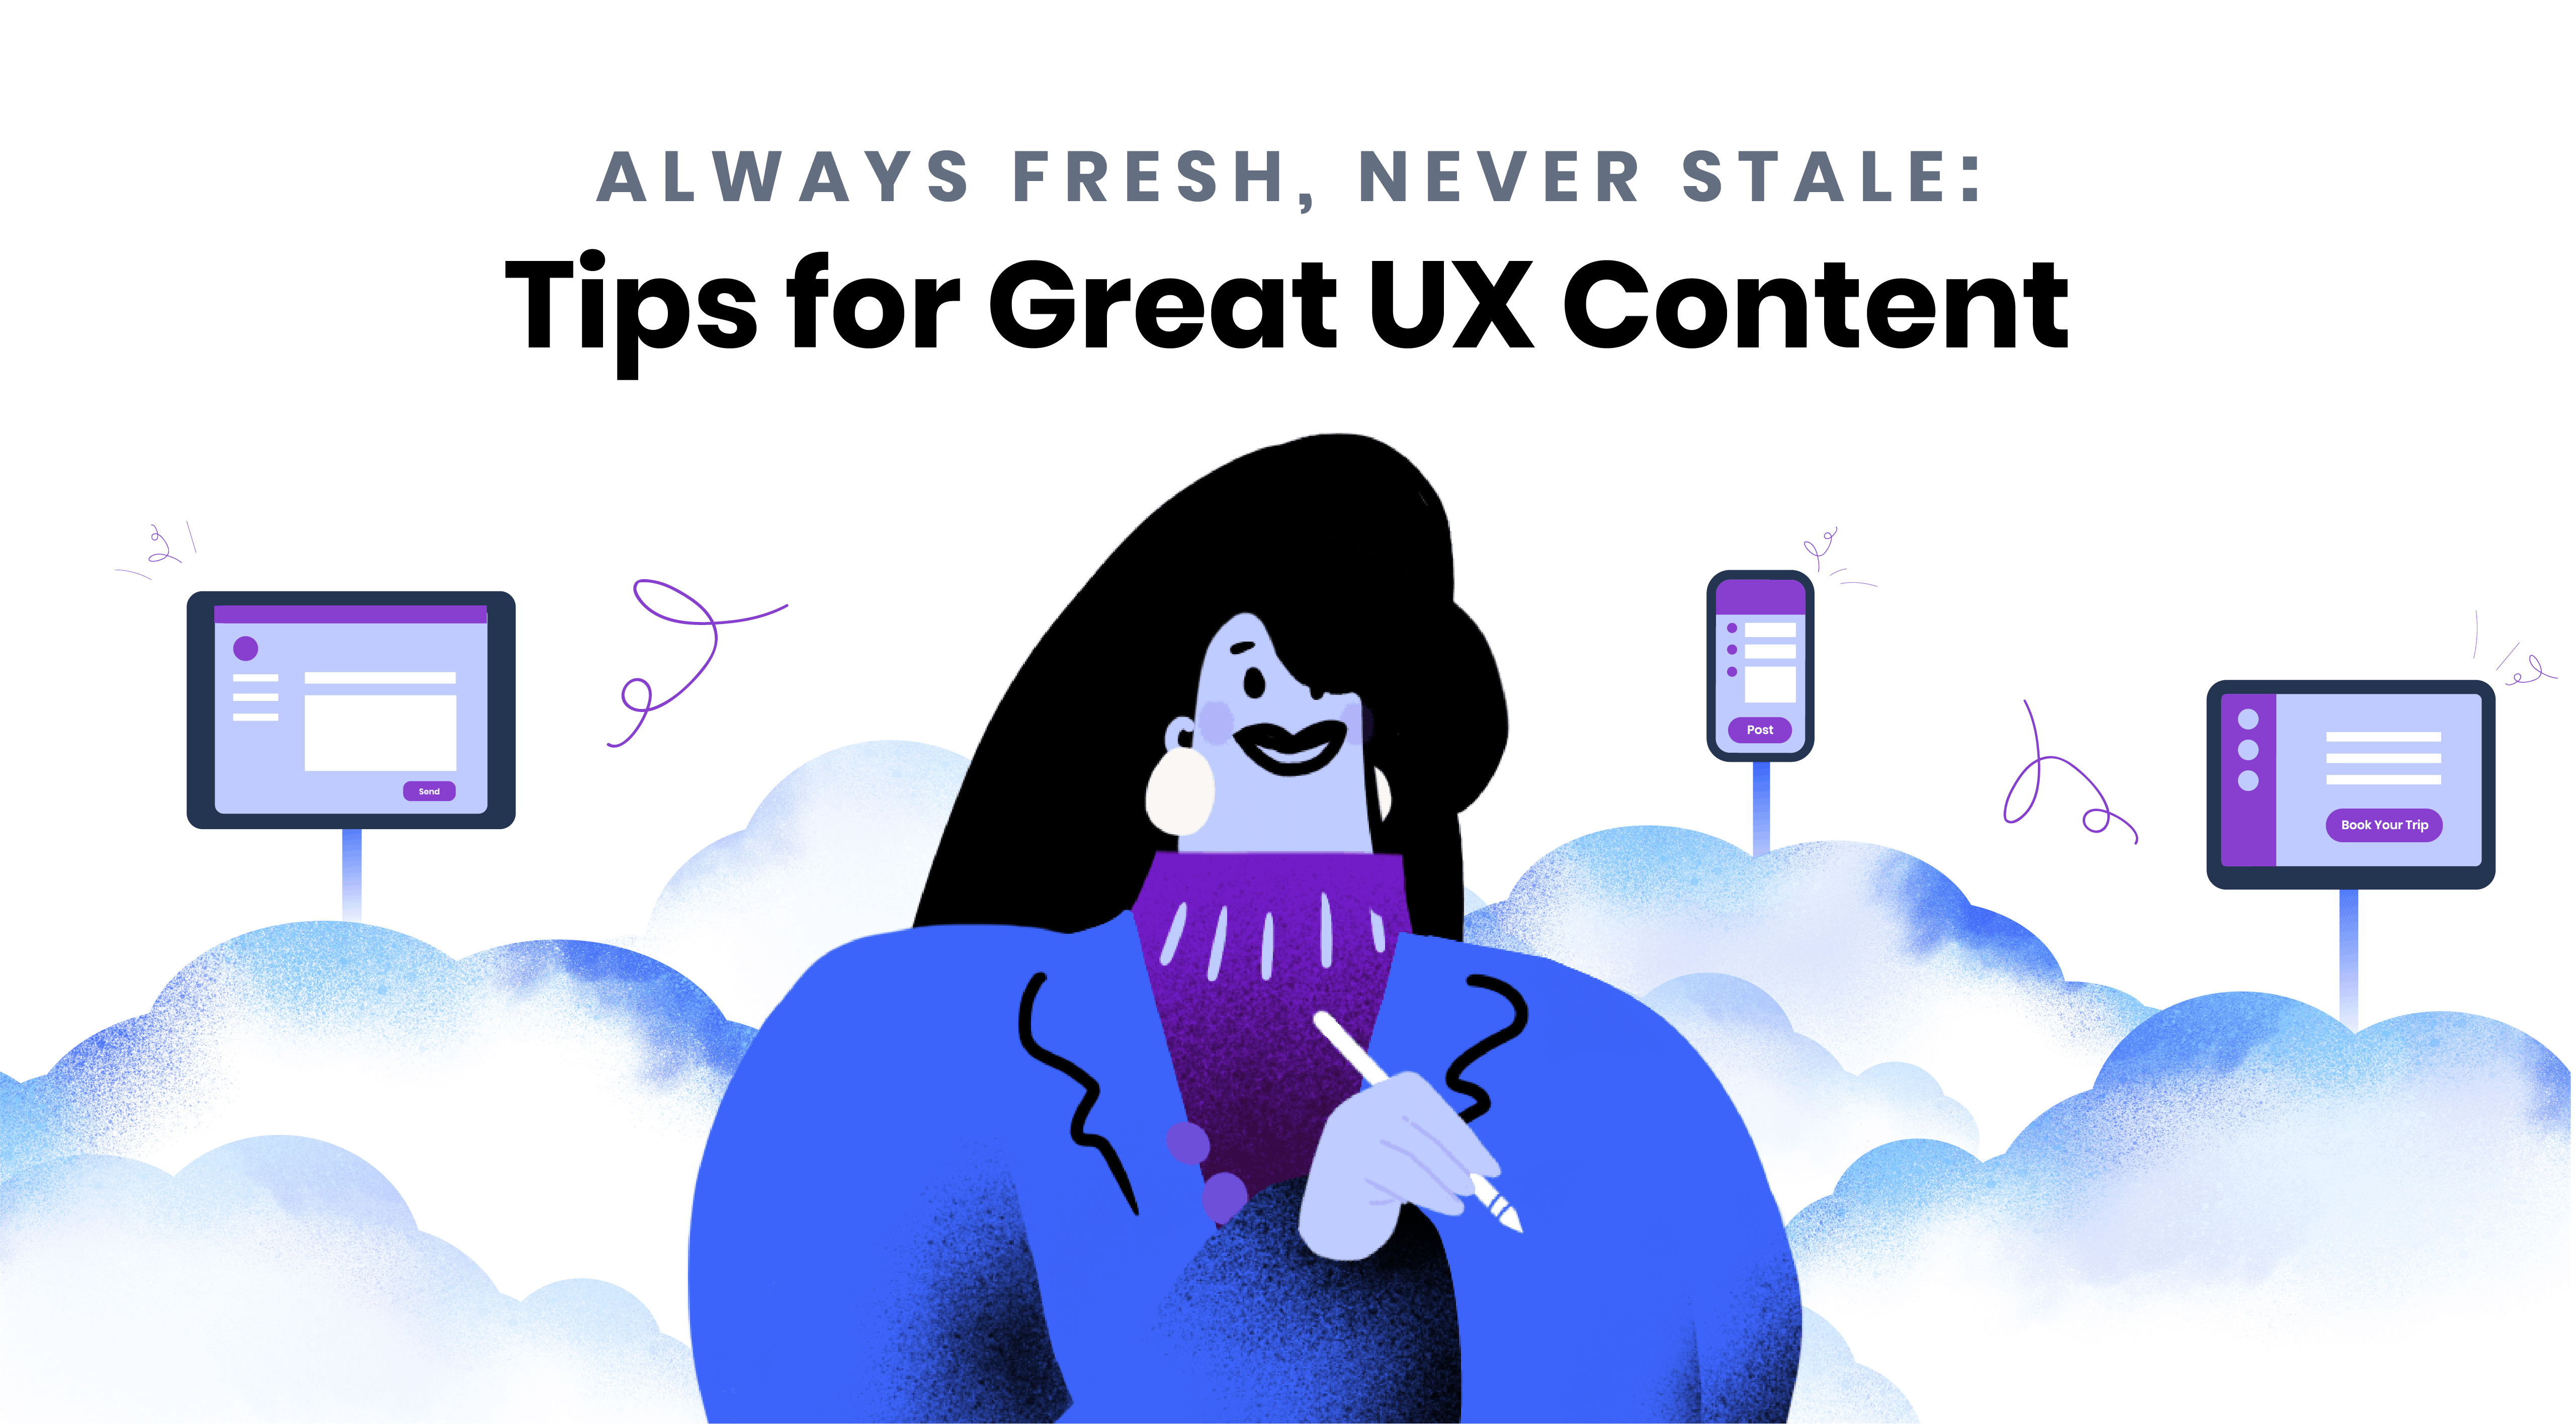 Always fresh, never stale: tips for great UX content